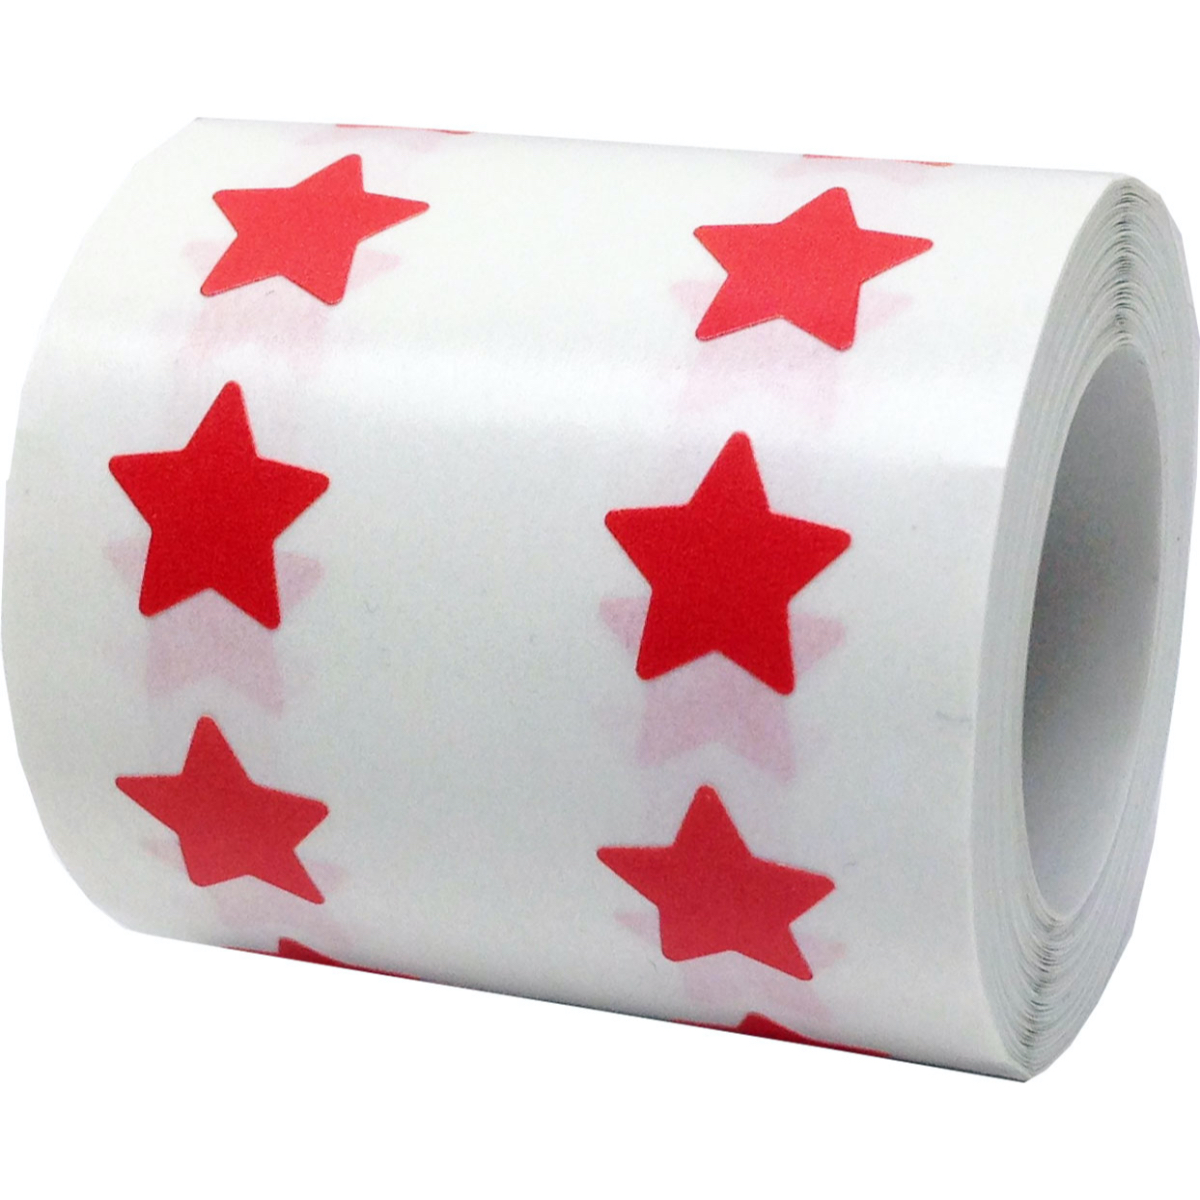 Small Red Star Stickers, 1/2 Star Shape